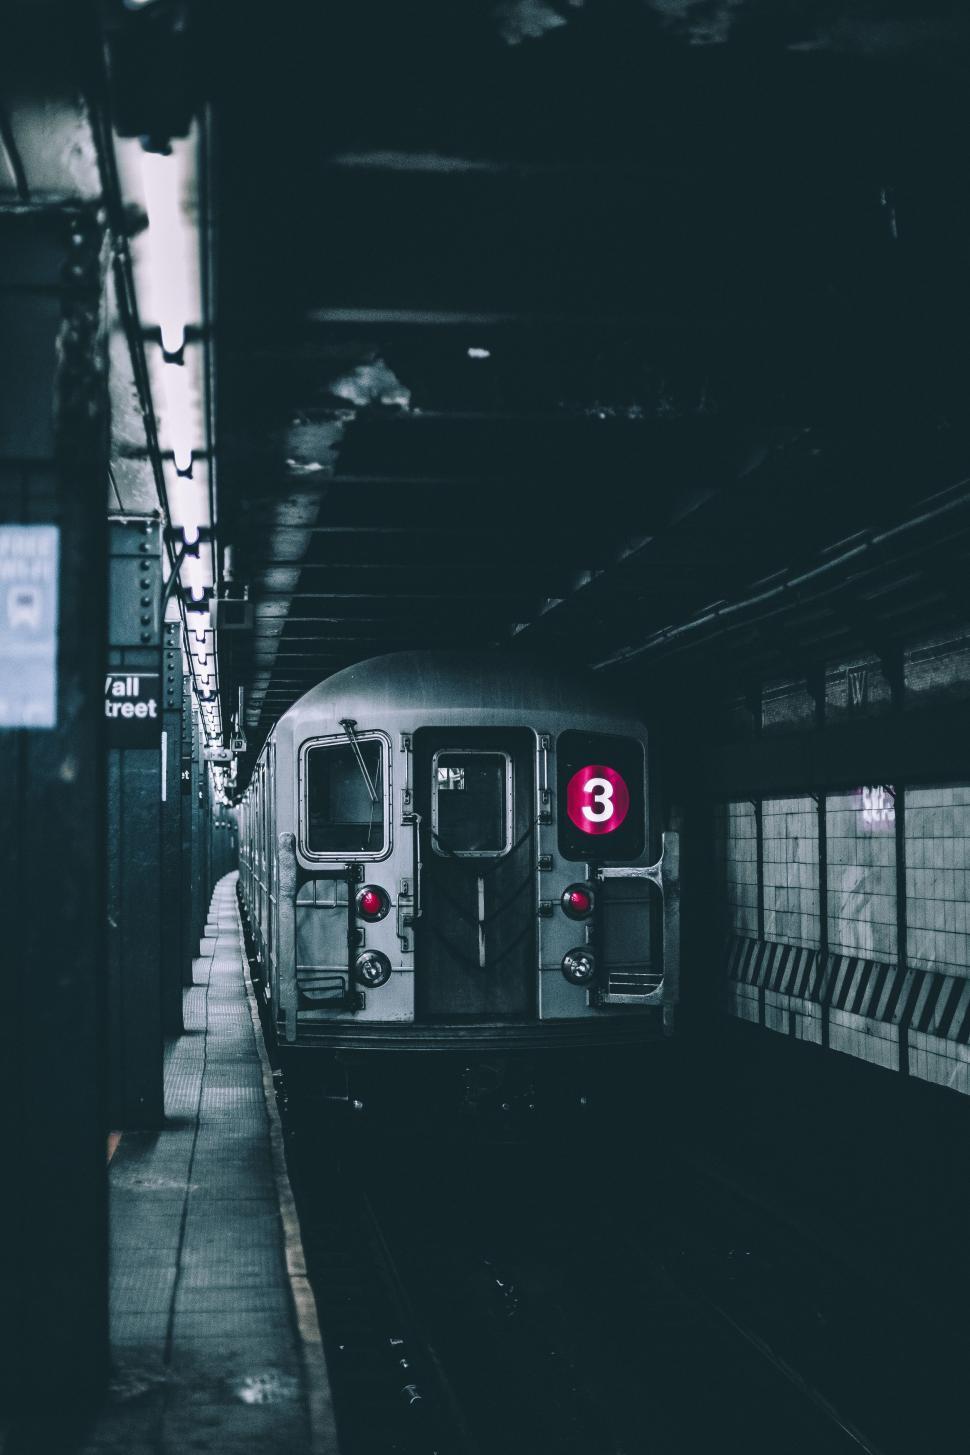 Free Image of Subway Train Arrival at Train Station 